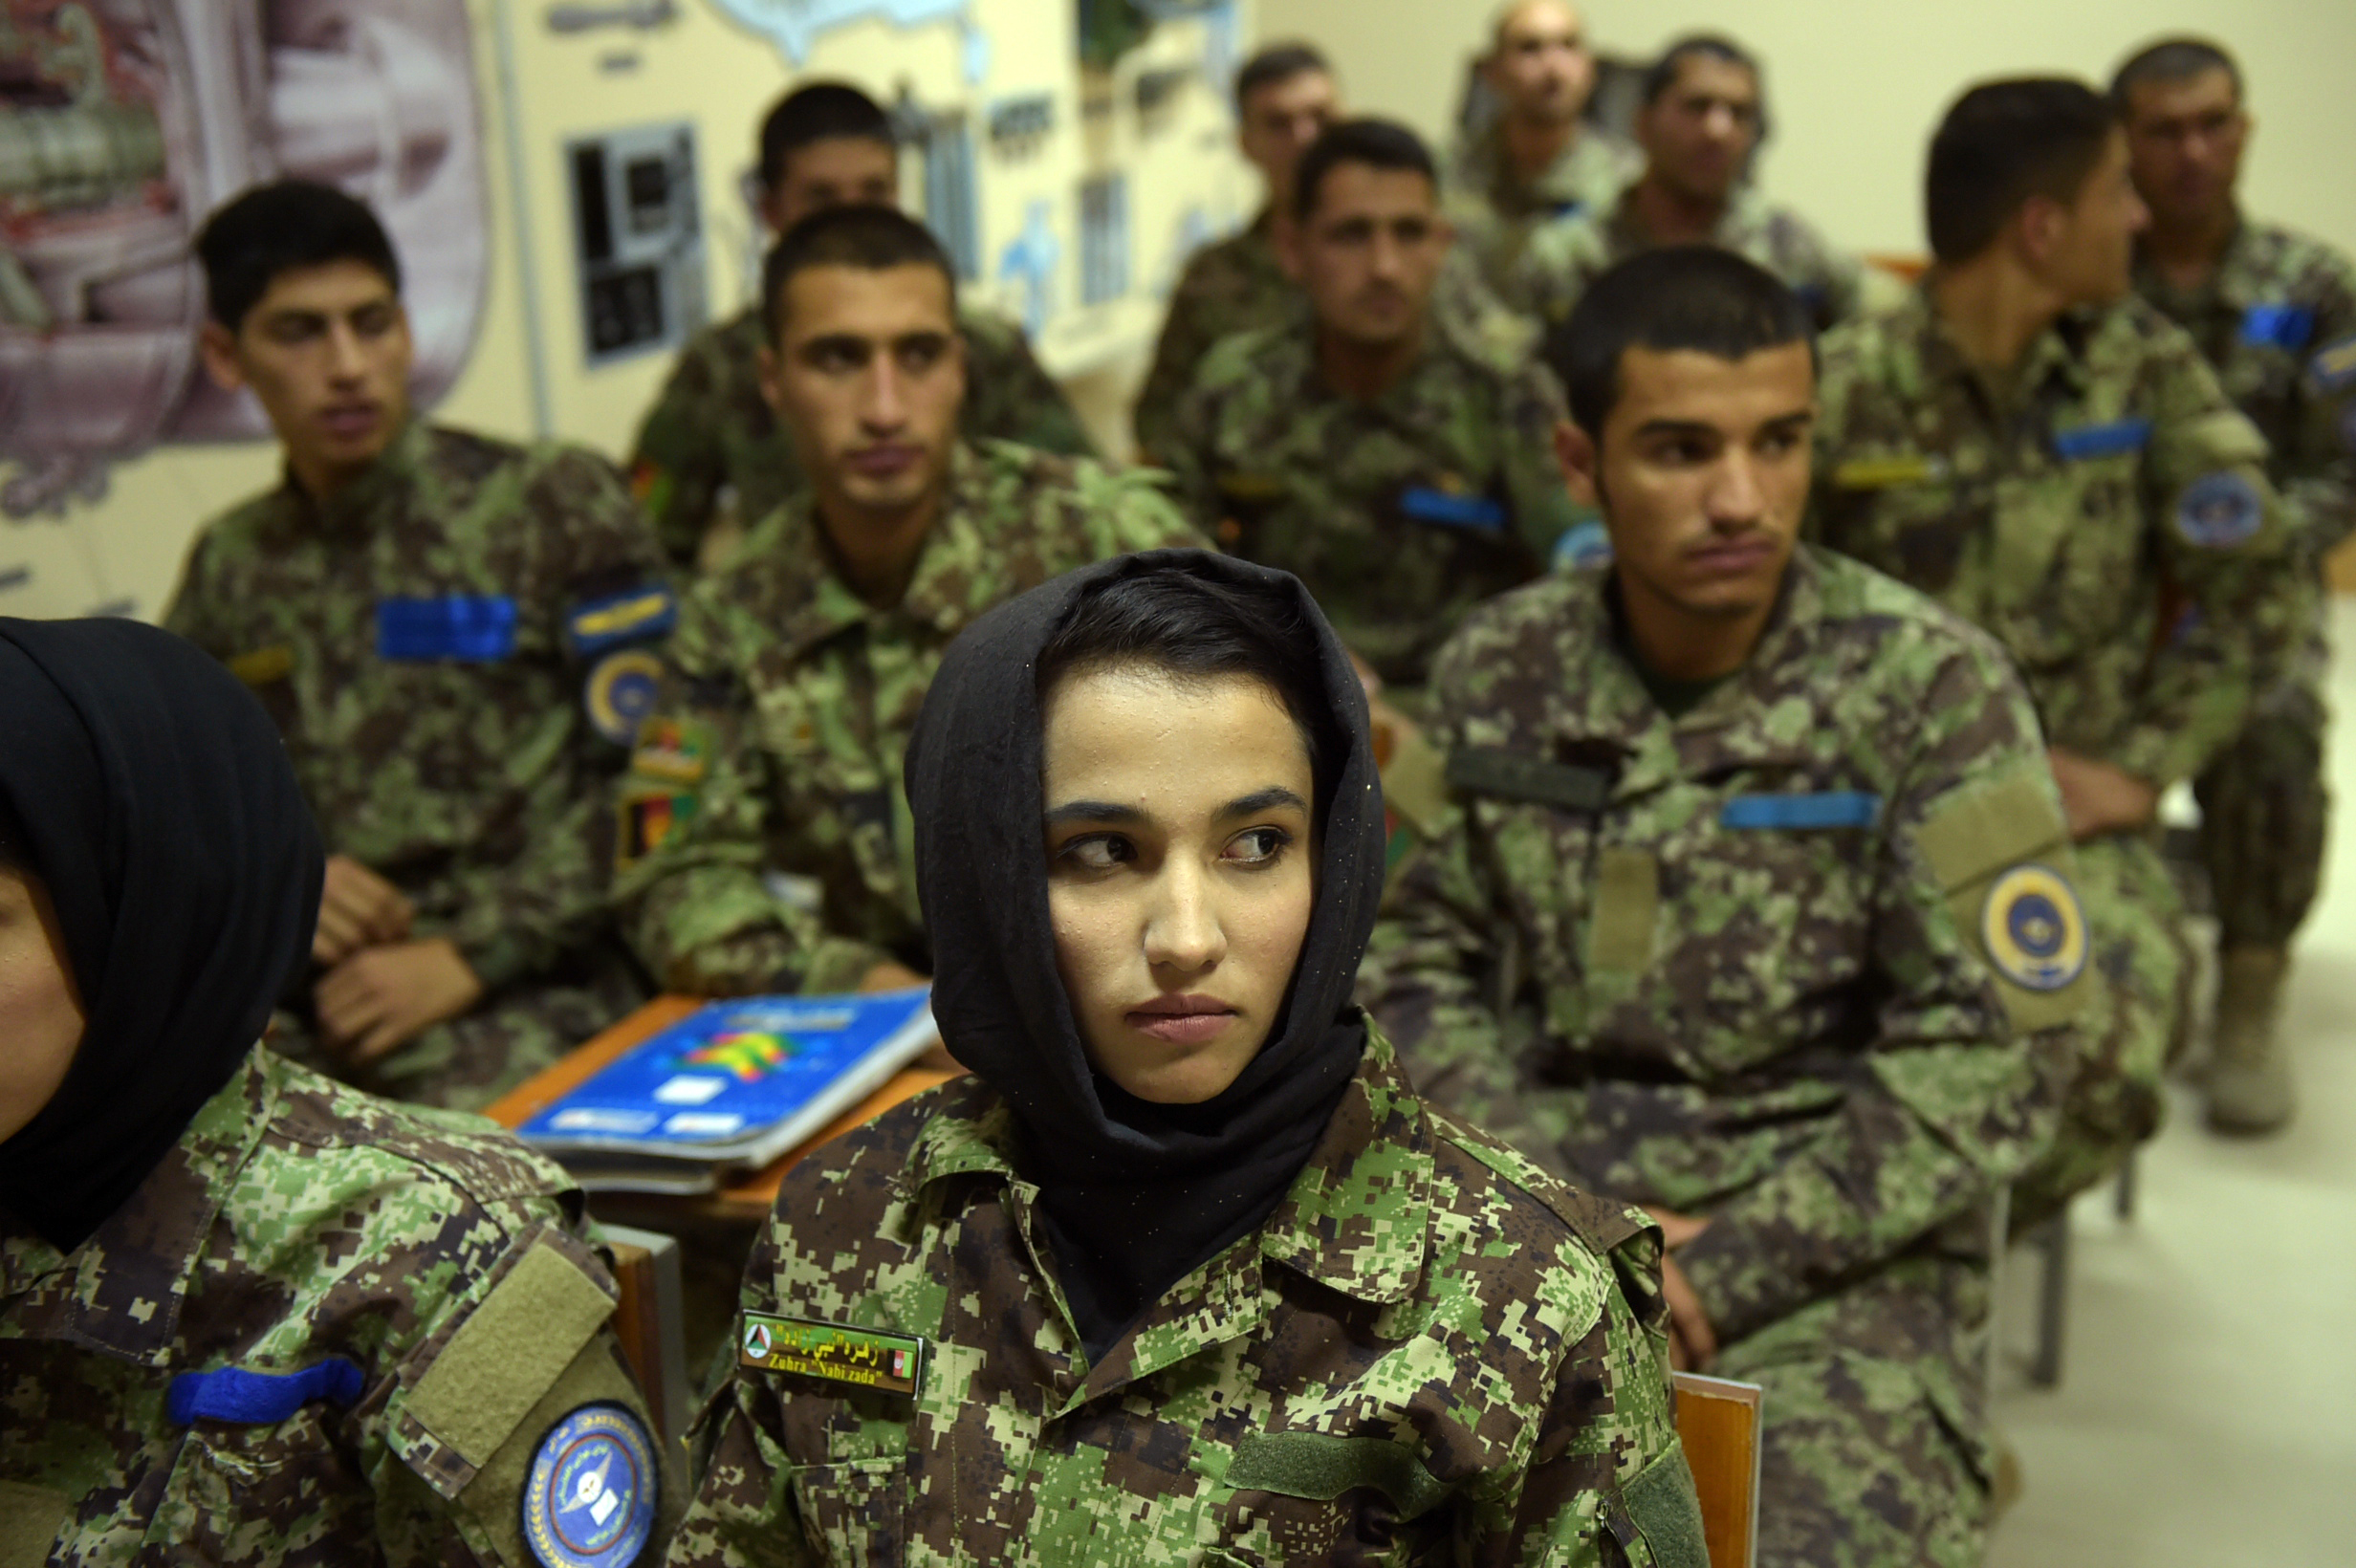 New Afghan air force pilots attend a class at the air force university in Kabul on Sept. 29, 2016. (Shah Marai/AFP via Getty Images)